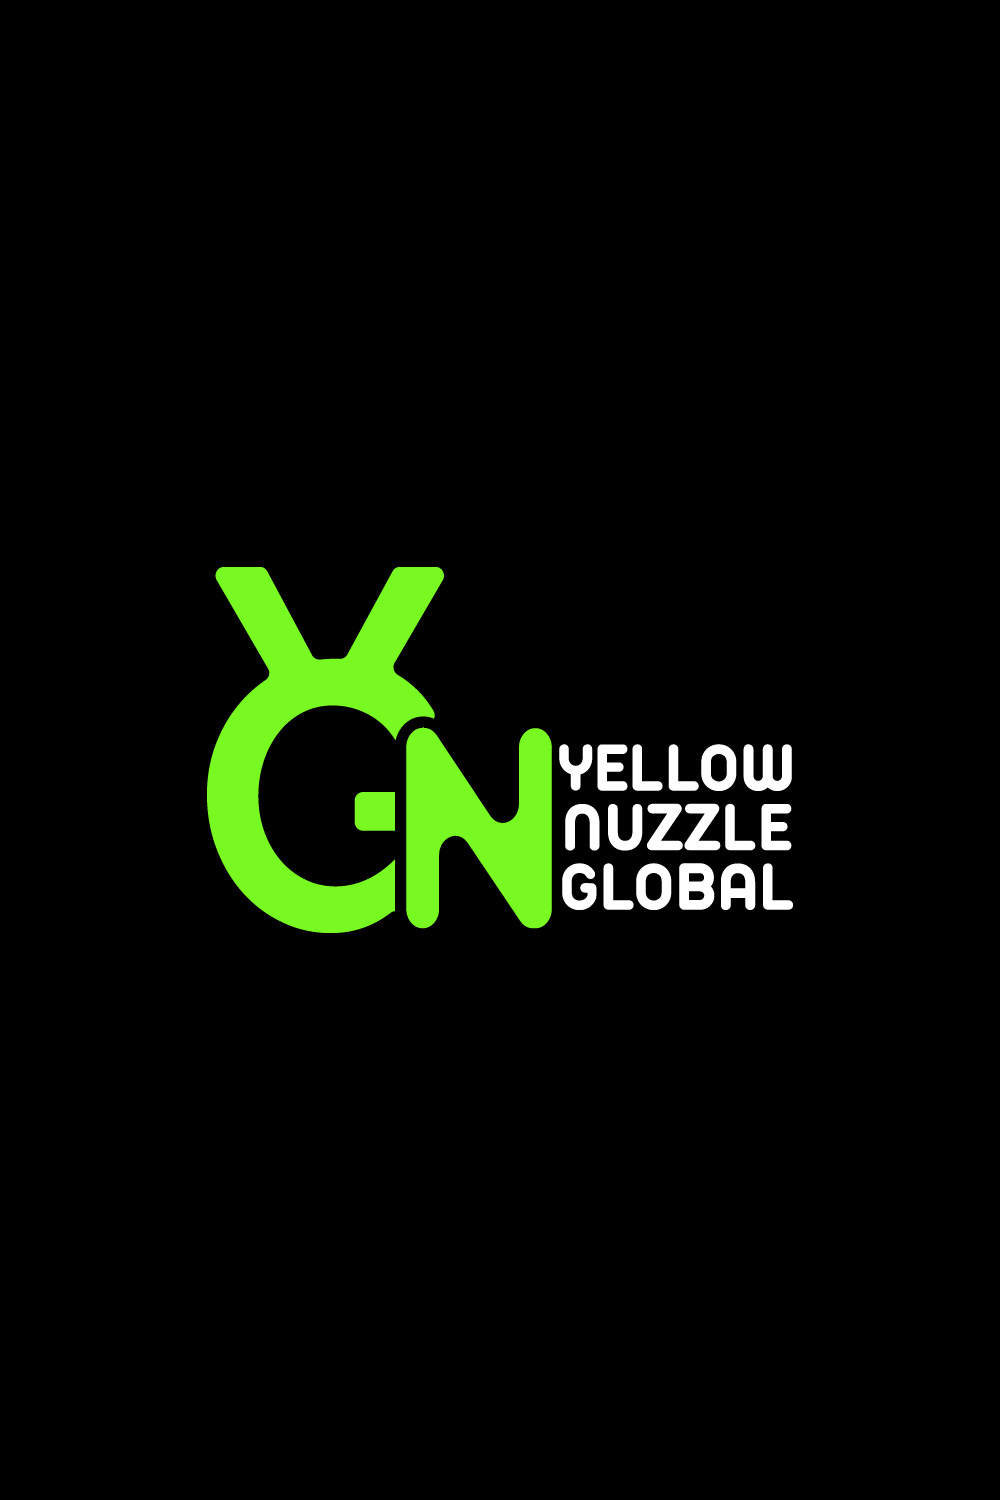 Yellow Nuzzle Global pinterest preview image.